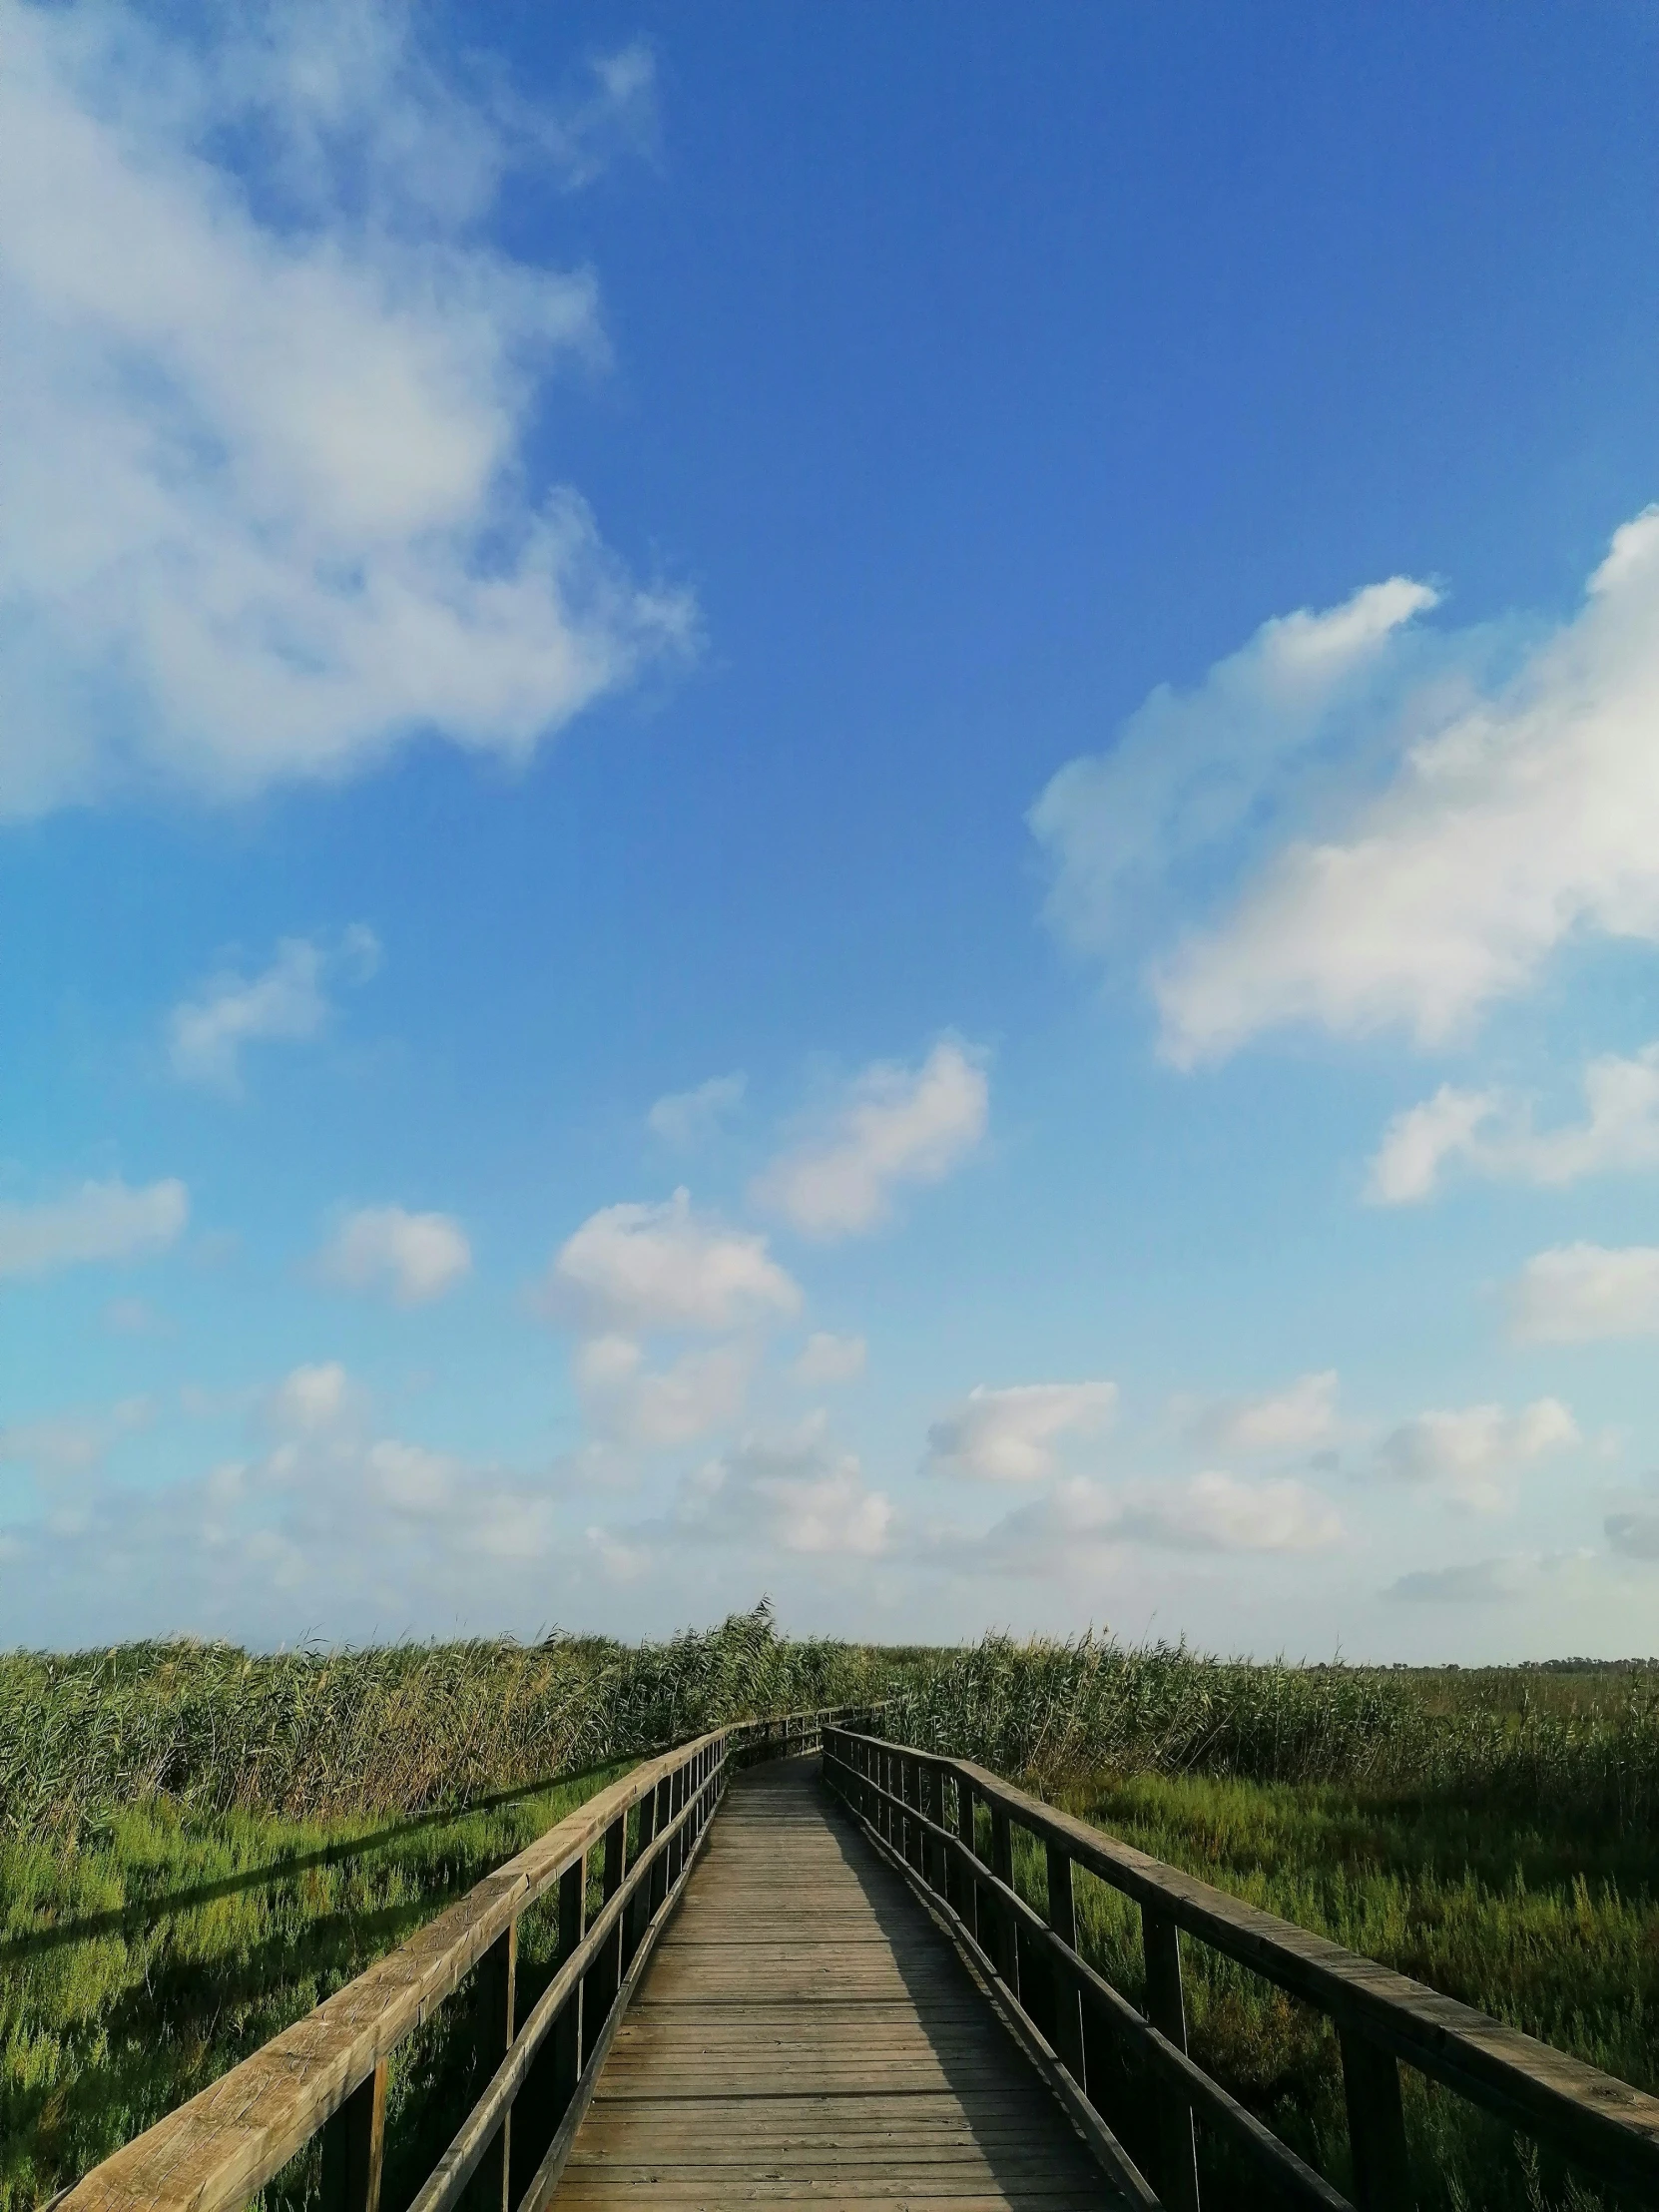 the wooden walkway is stretching into the sky